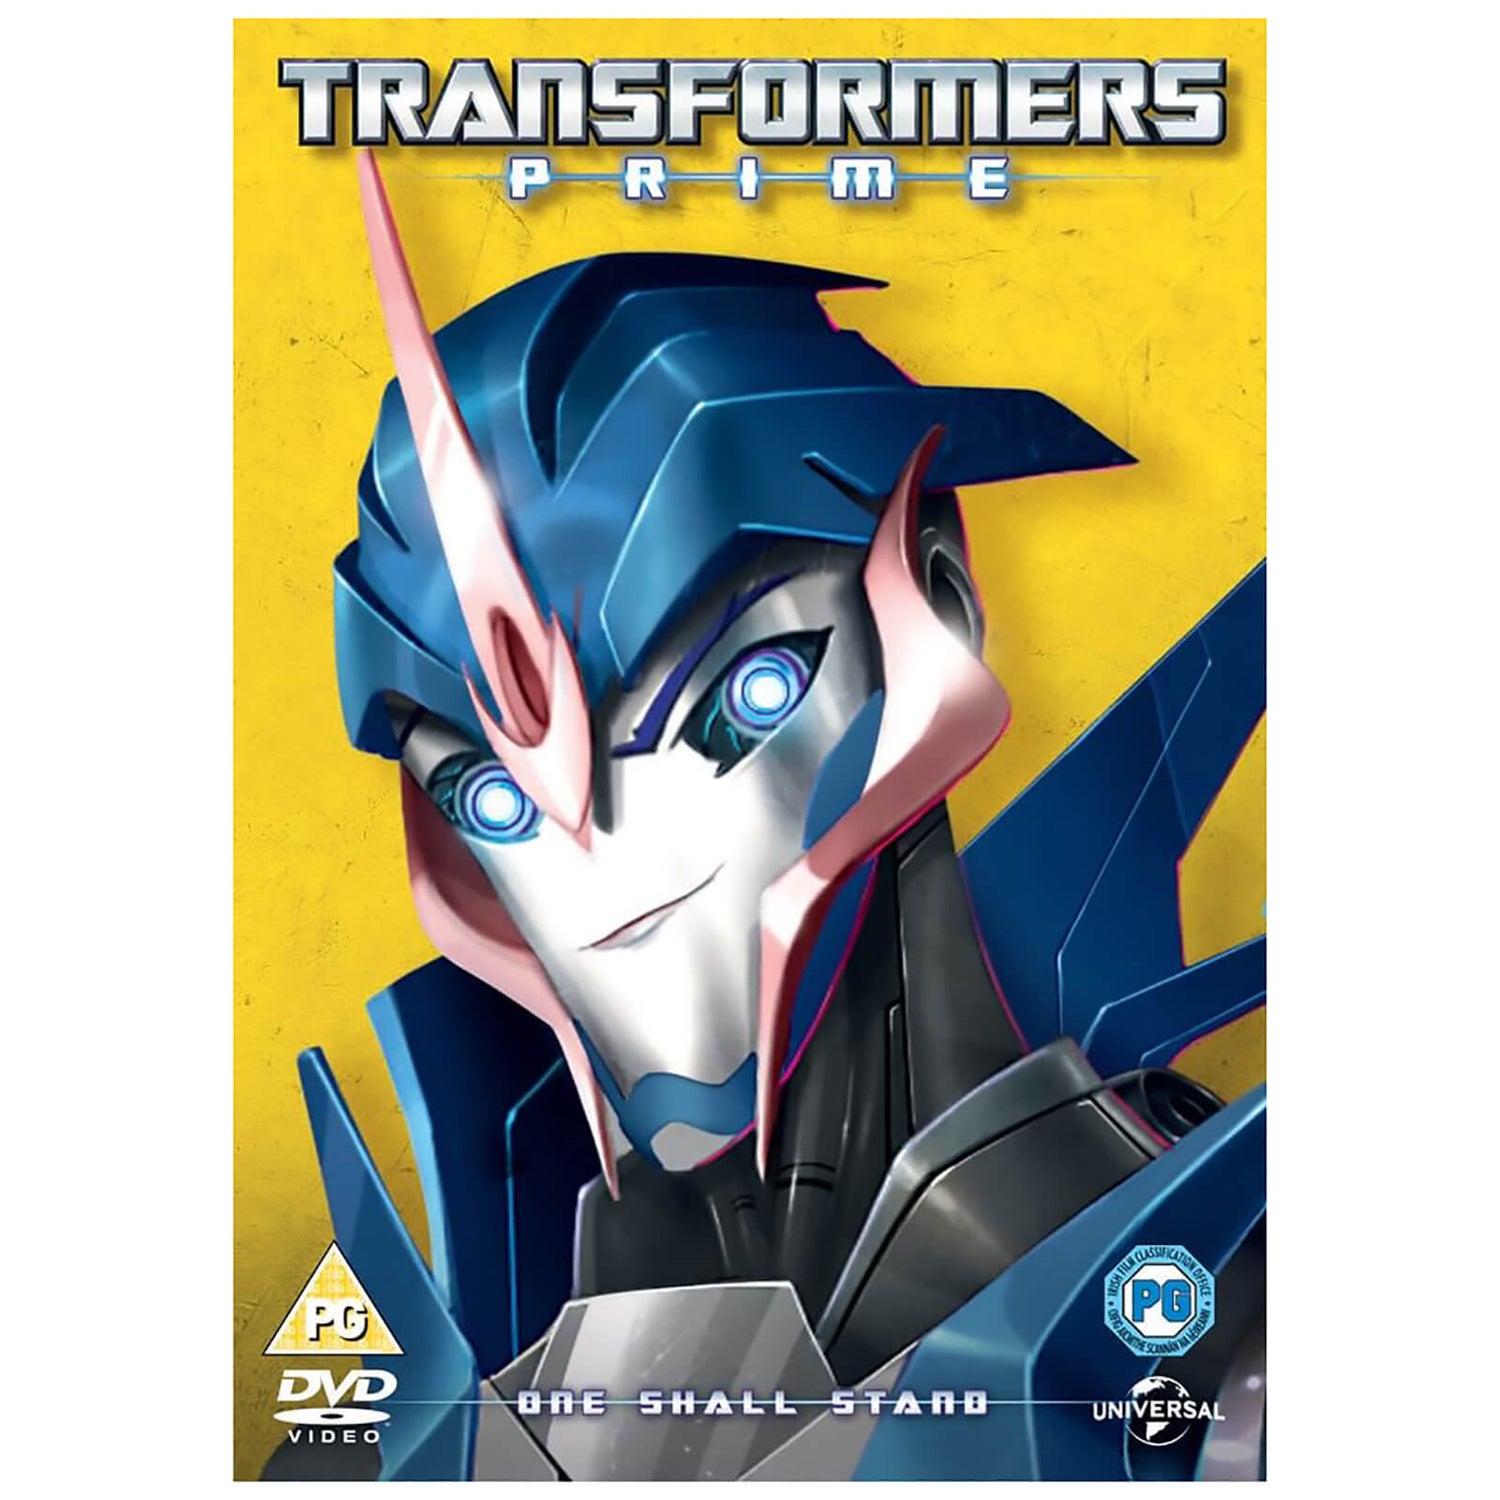 Transformers Prime - One Shall Stand